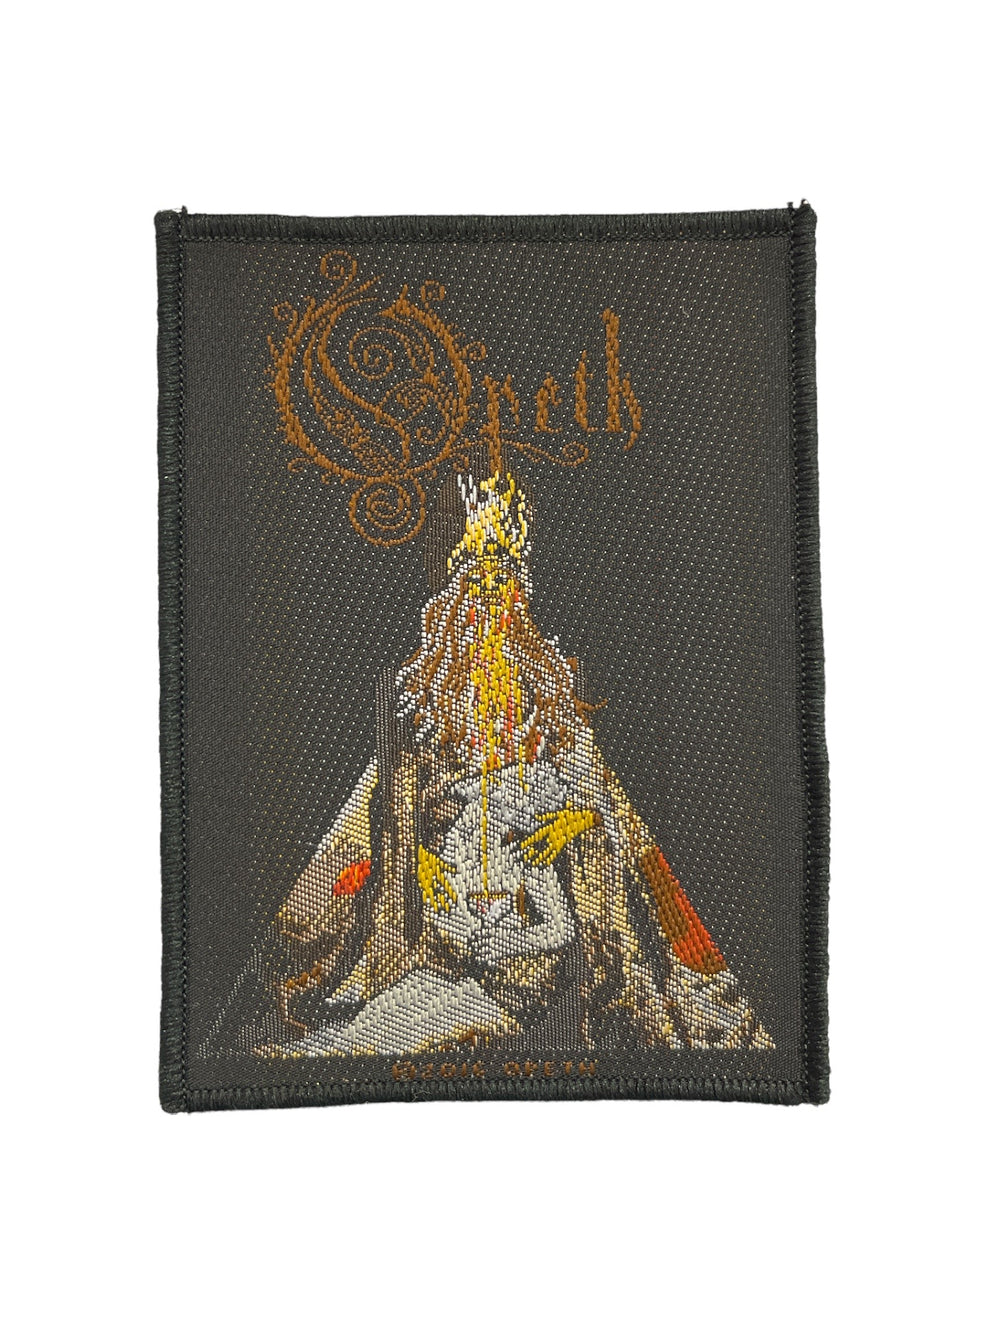 Opeth Sorceress Official Woven Patch Brand New